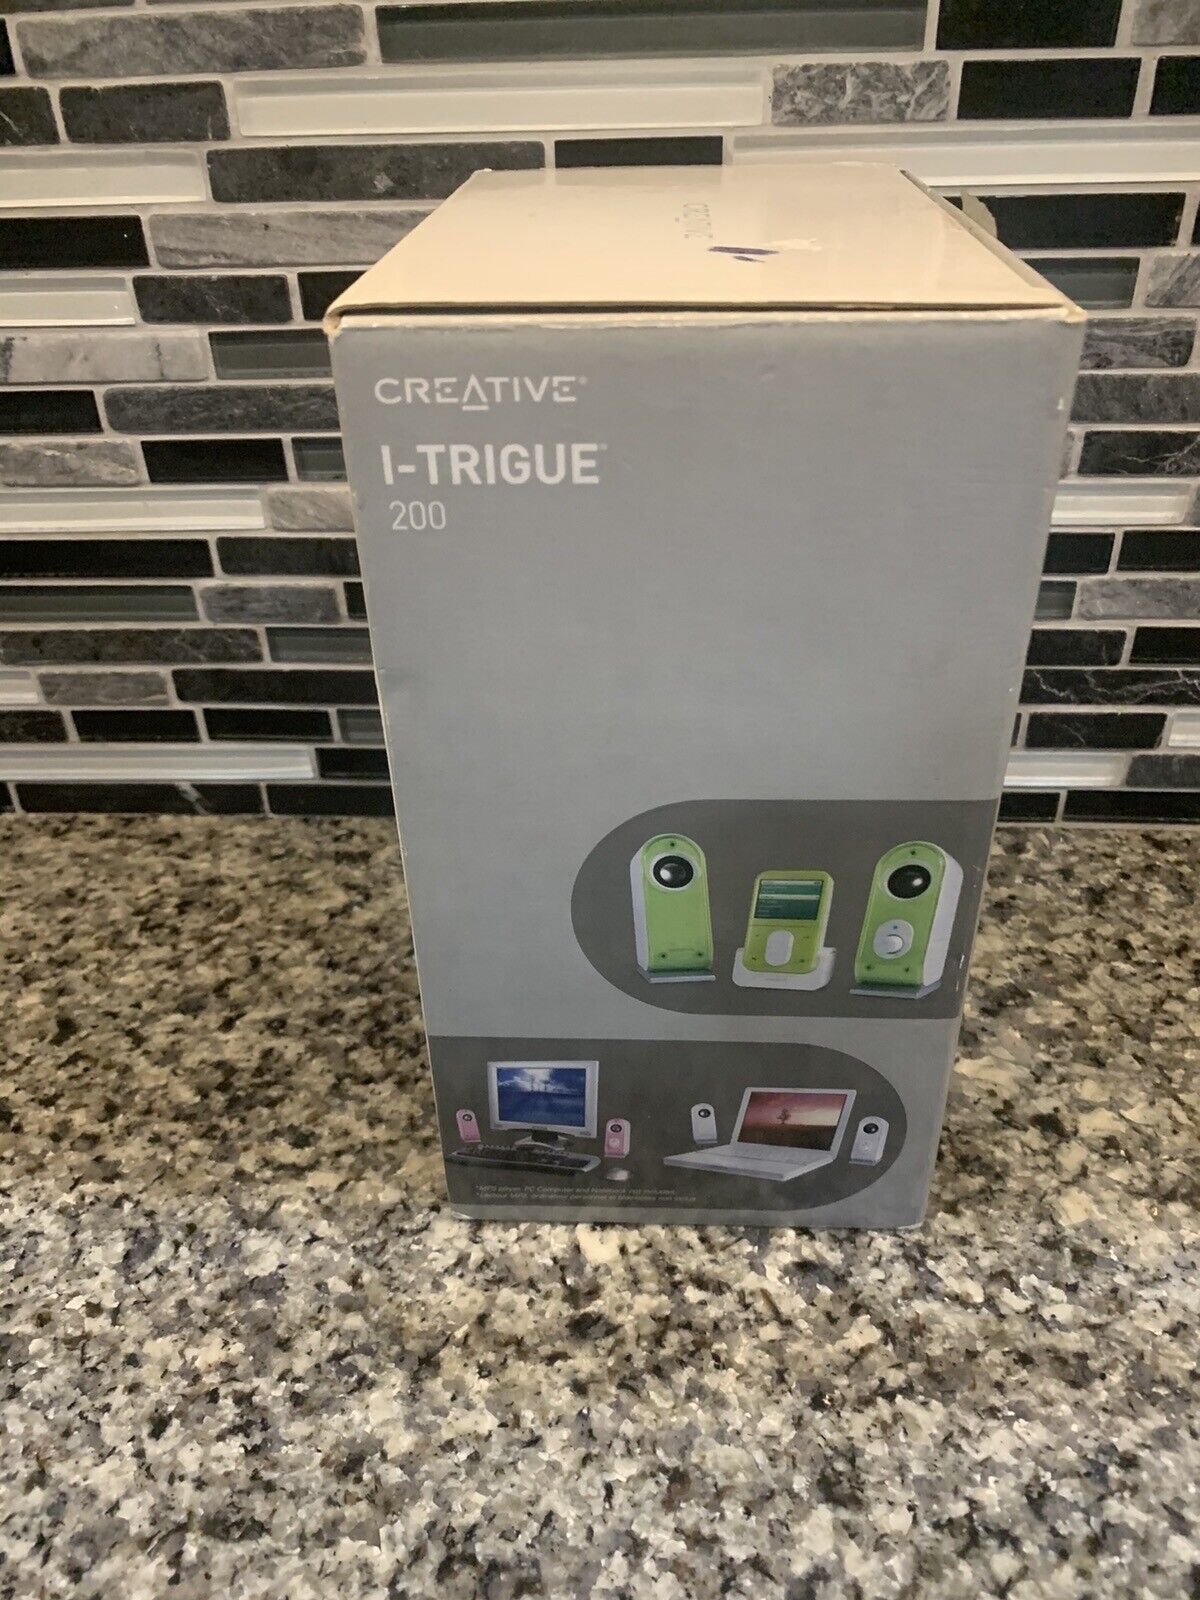 New Sealed Creative I-Trigue 200 Computer Speakers Snap On Color Plates Rare